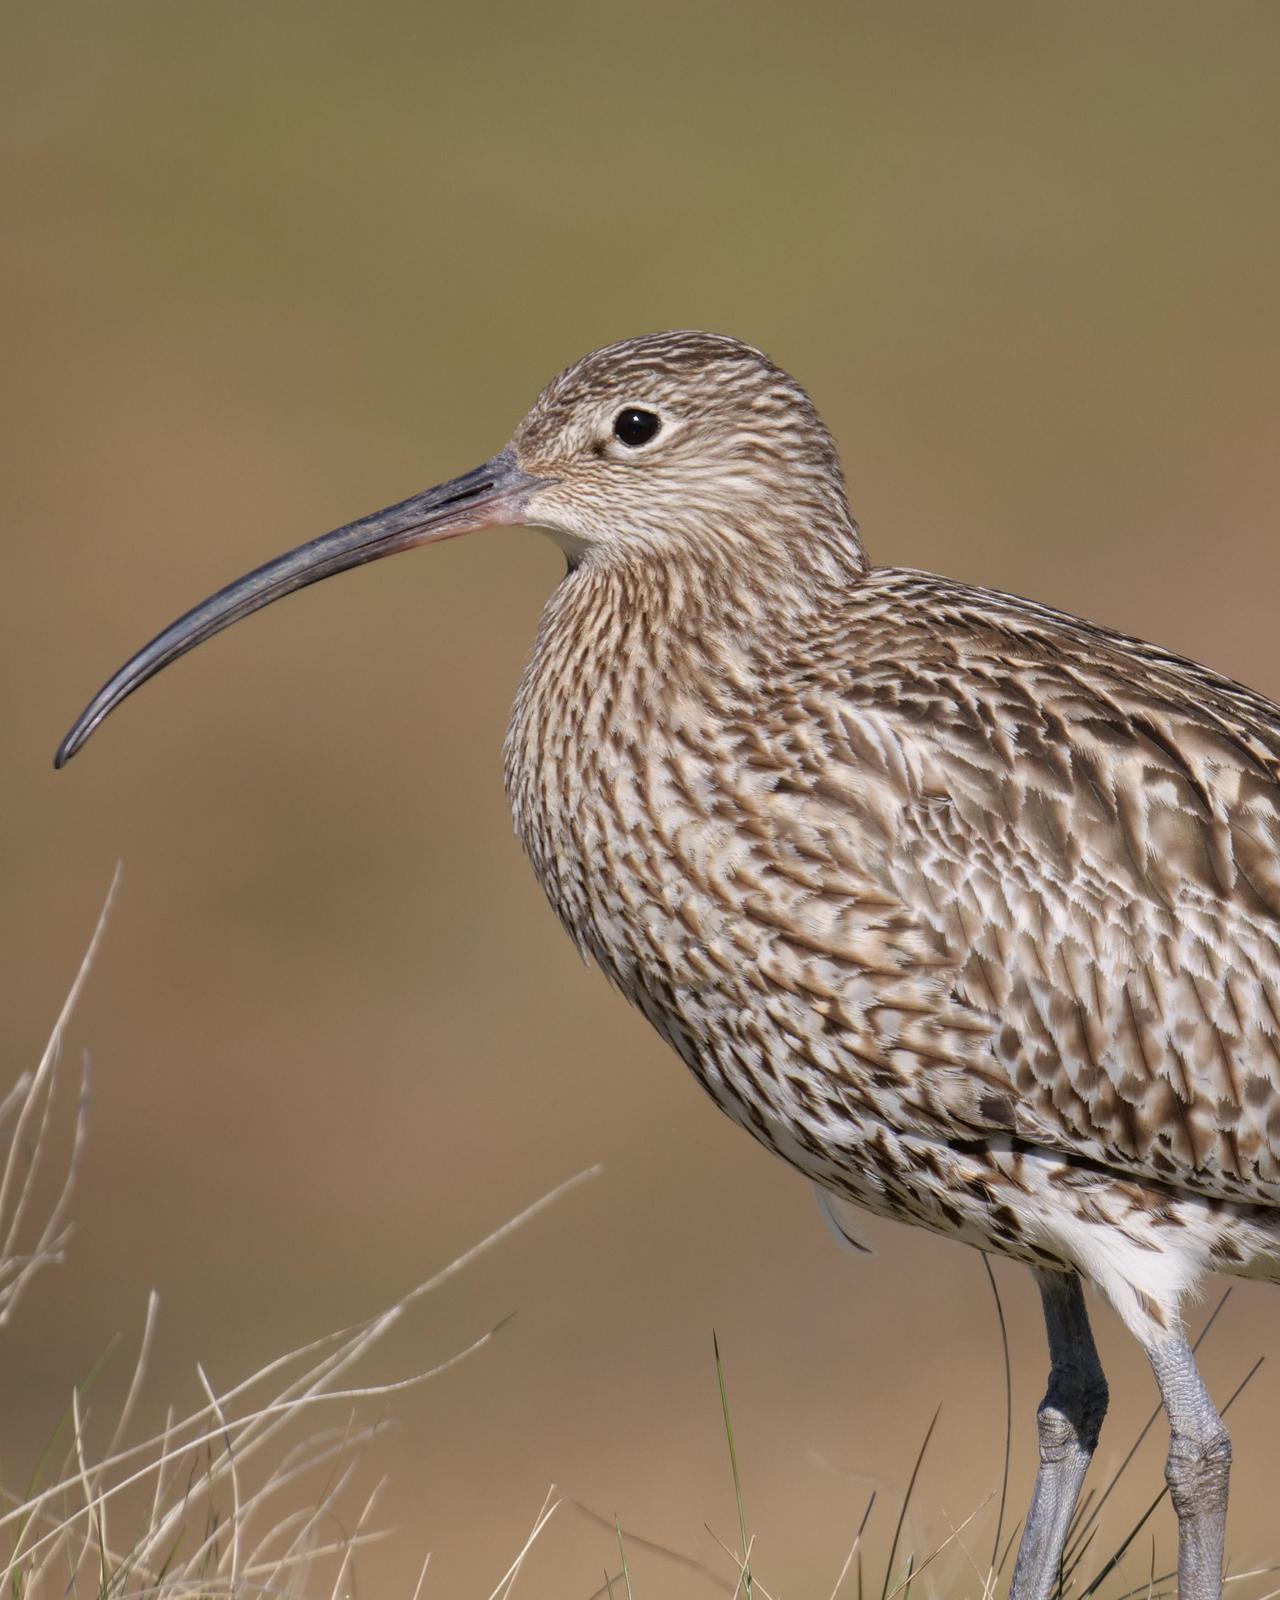 Eurasian Curlew Photo by Steve Percival